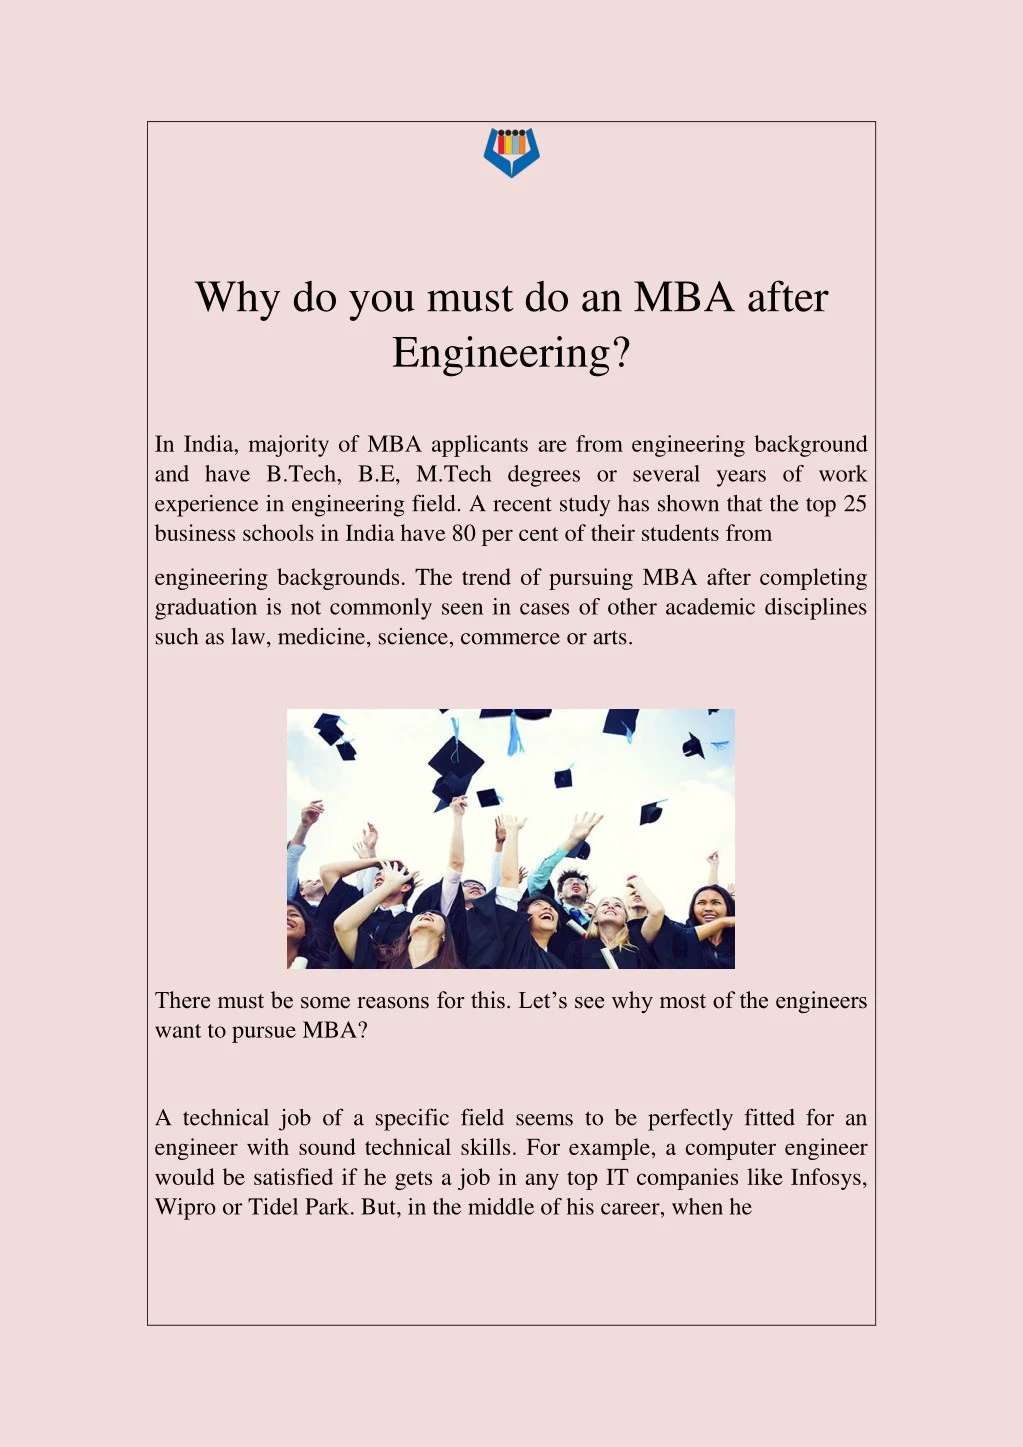 why do you must do an mba after engineering